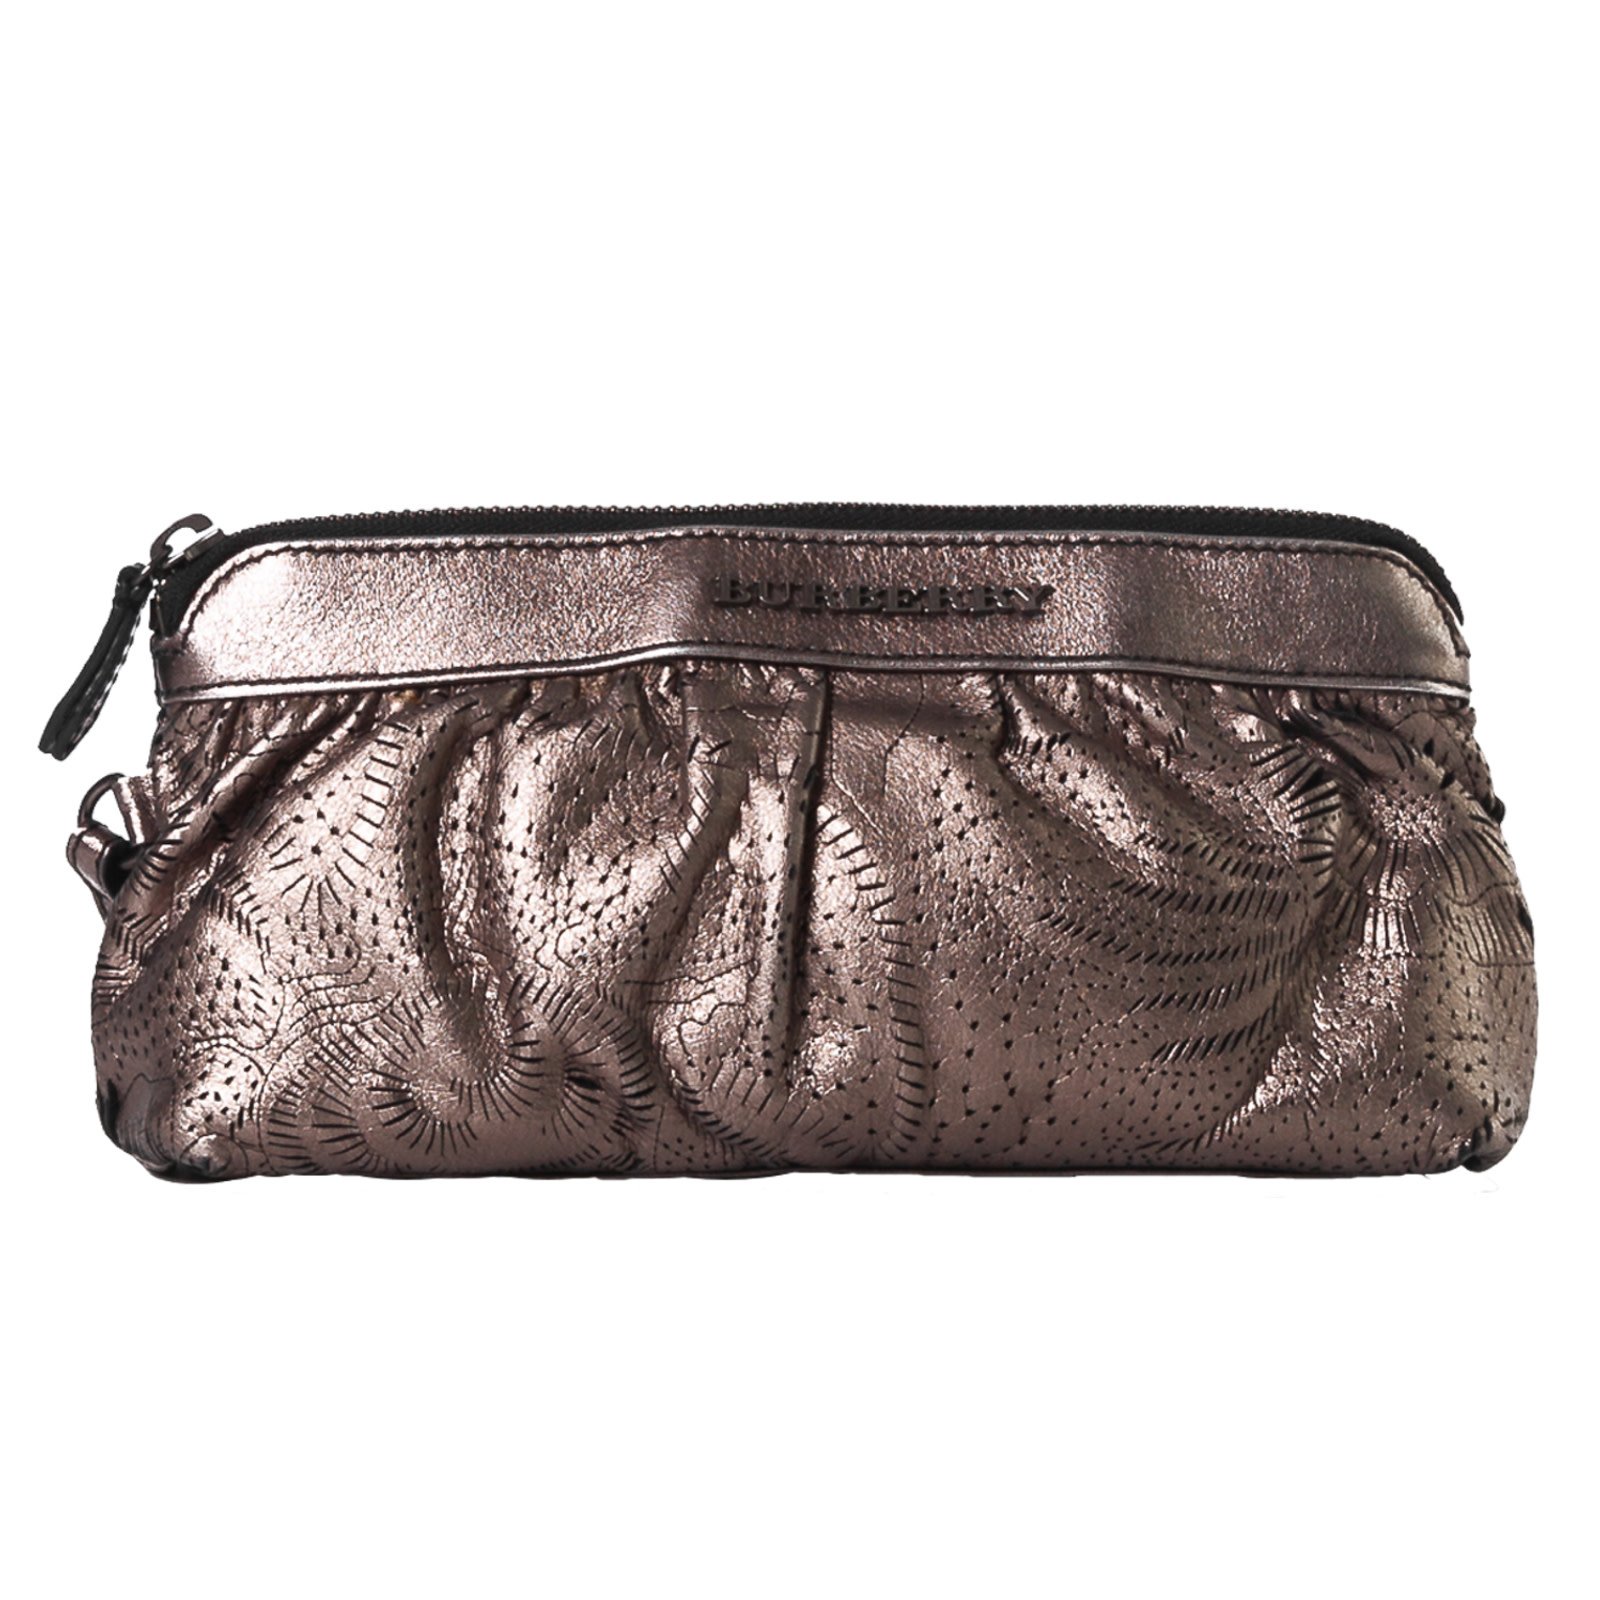 LONDON METALLIC PERFORATED FLORAL WRISTLET POUCH